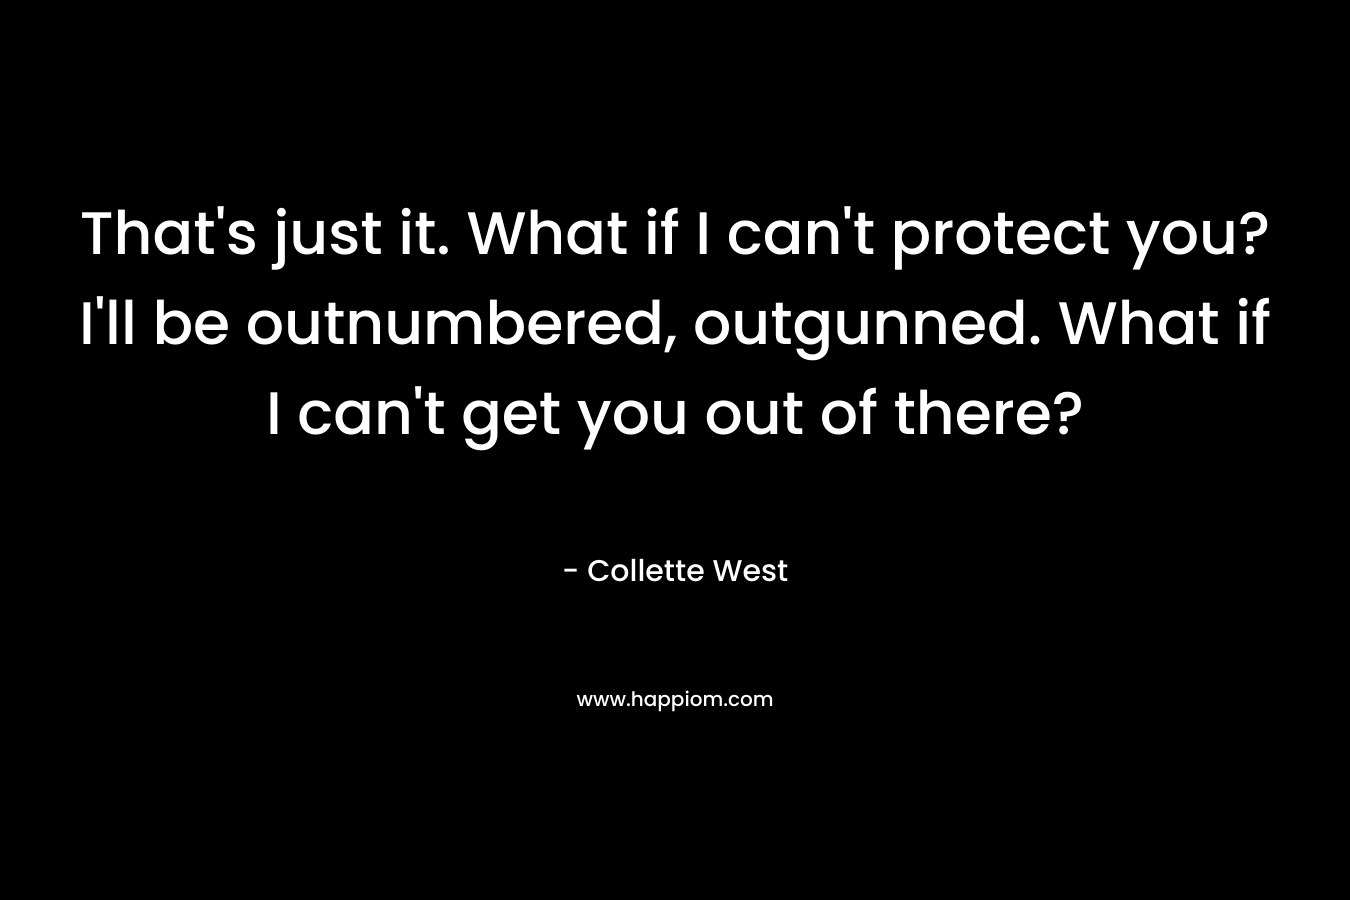 That’s just it. What if I can’t protect you? I’ll be outnumbered, outgunned. What if I can’t get you out of there? – Collette West